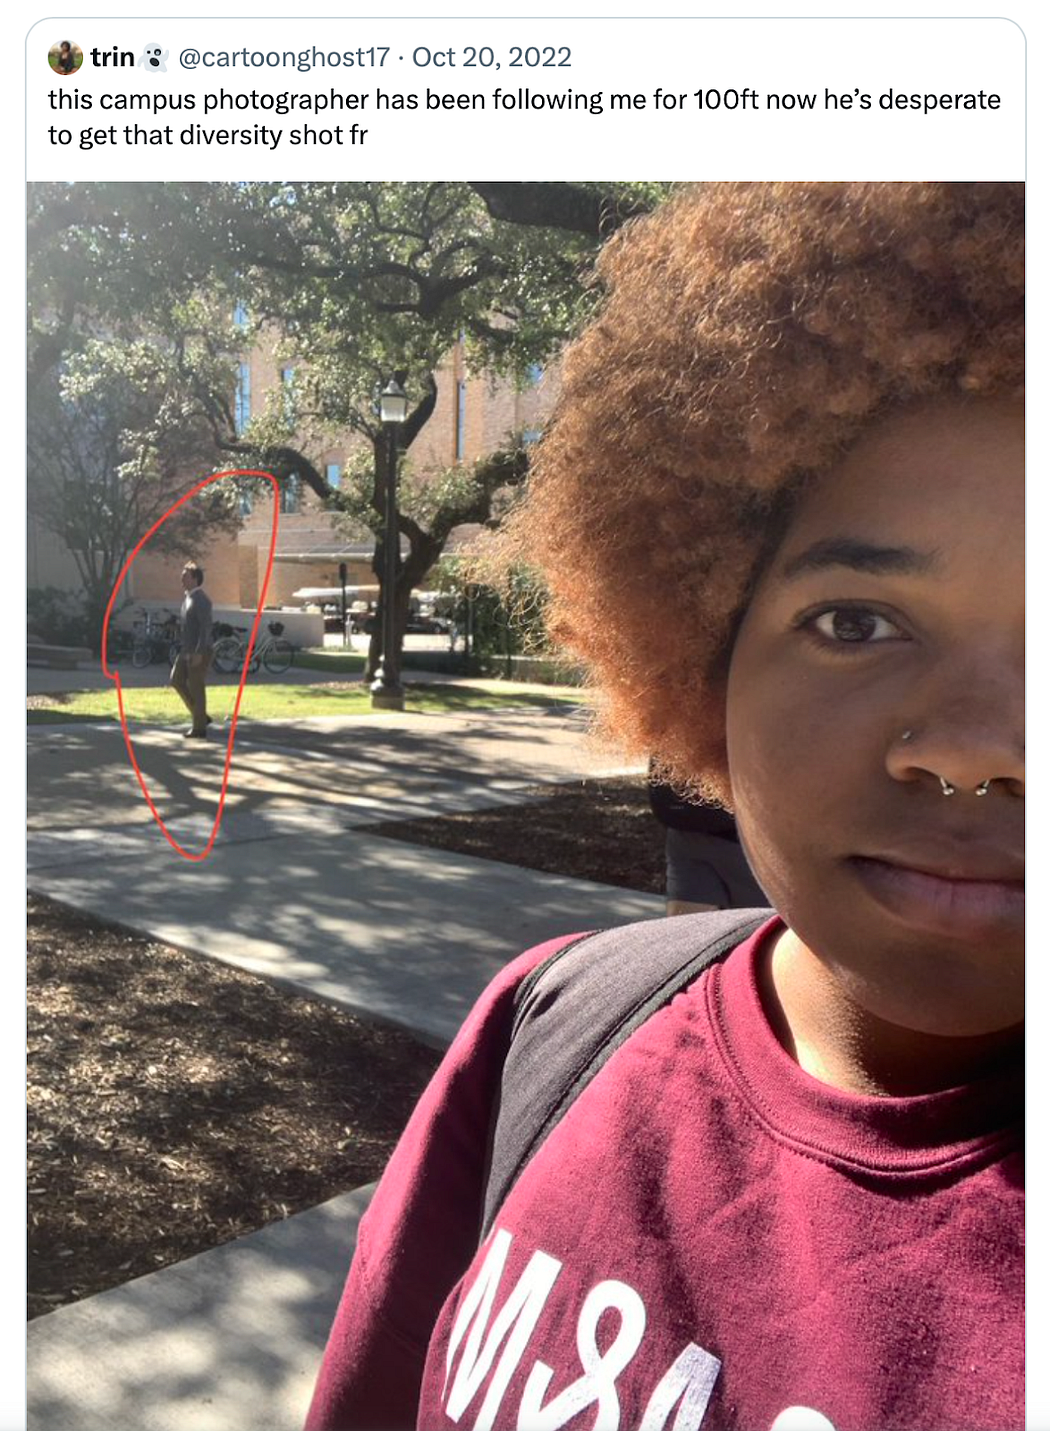 Black student wearing burgundy Texas A&M sweatshirt points out photographer behind them while they navigate campus. Tweet accompanying the photo says: “this campus photographer has been following me for 100ft now he’s desperate to get that diversity shot fr”